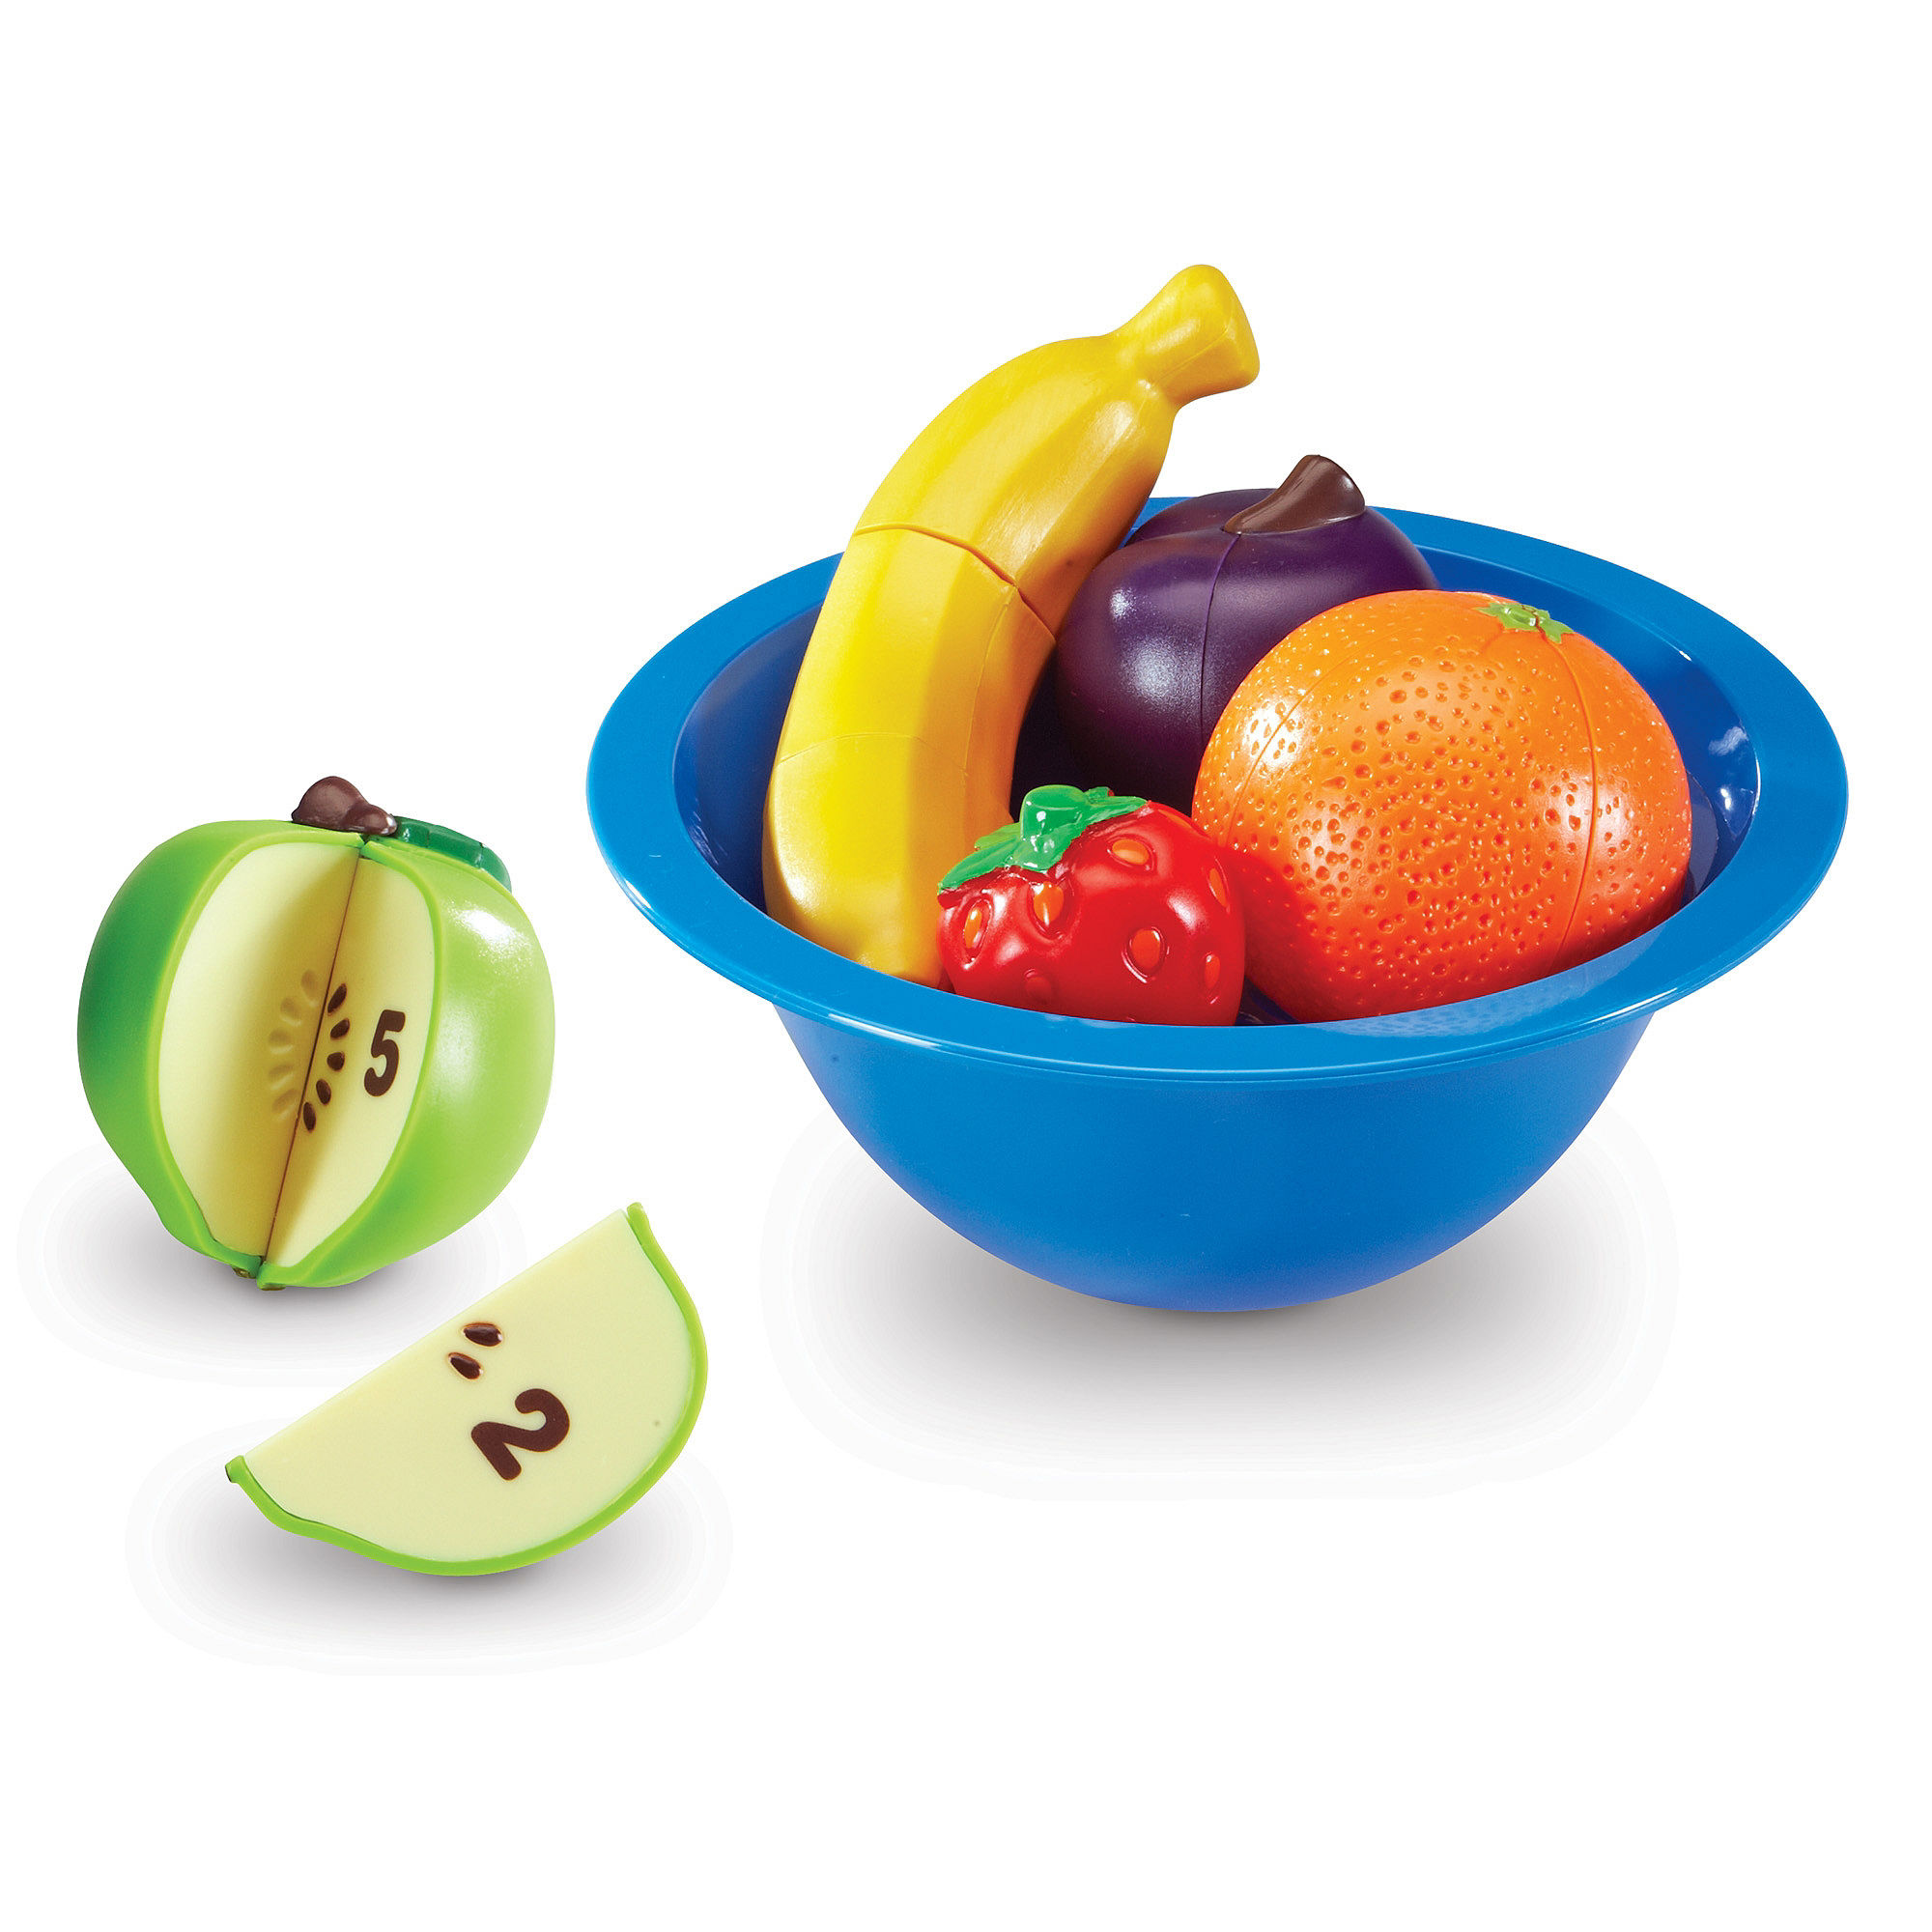 UPC 765023073133 product image for Learning Resources Smart Snacks Counting Fun Fruit Bowl | upcitemdb.com